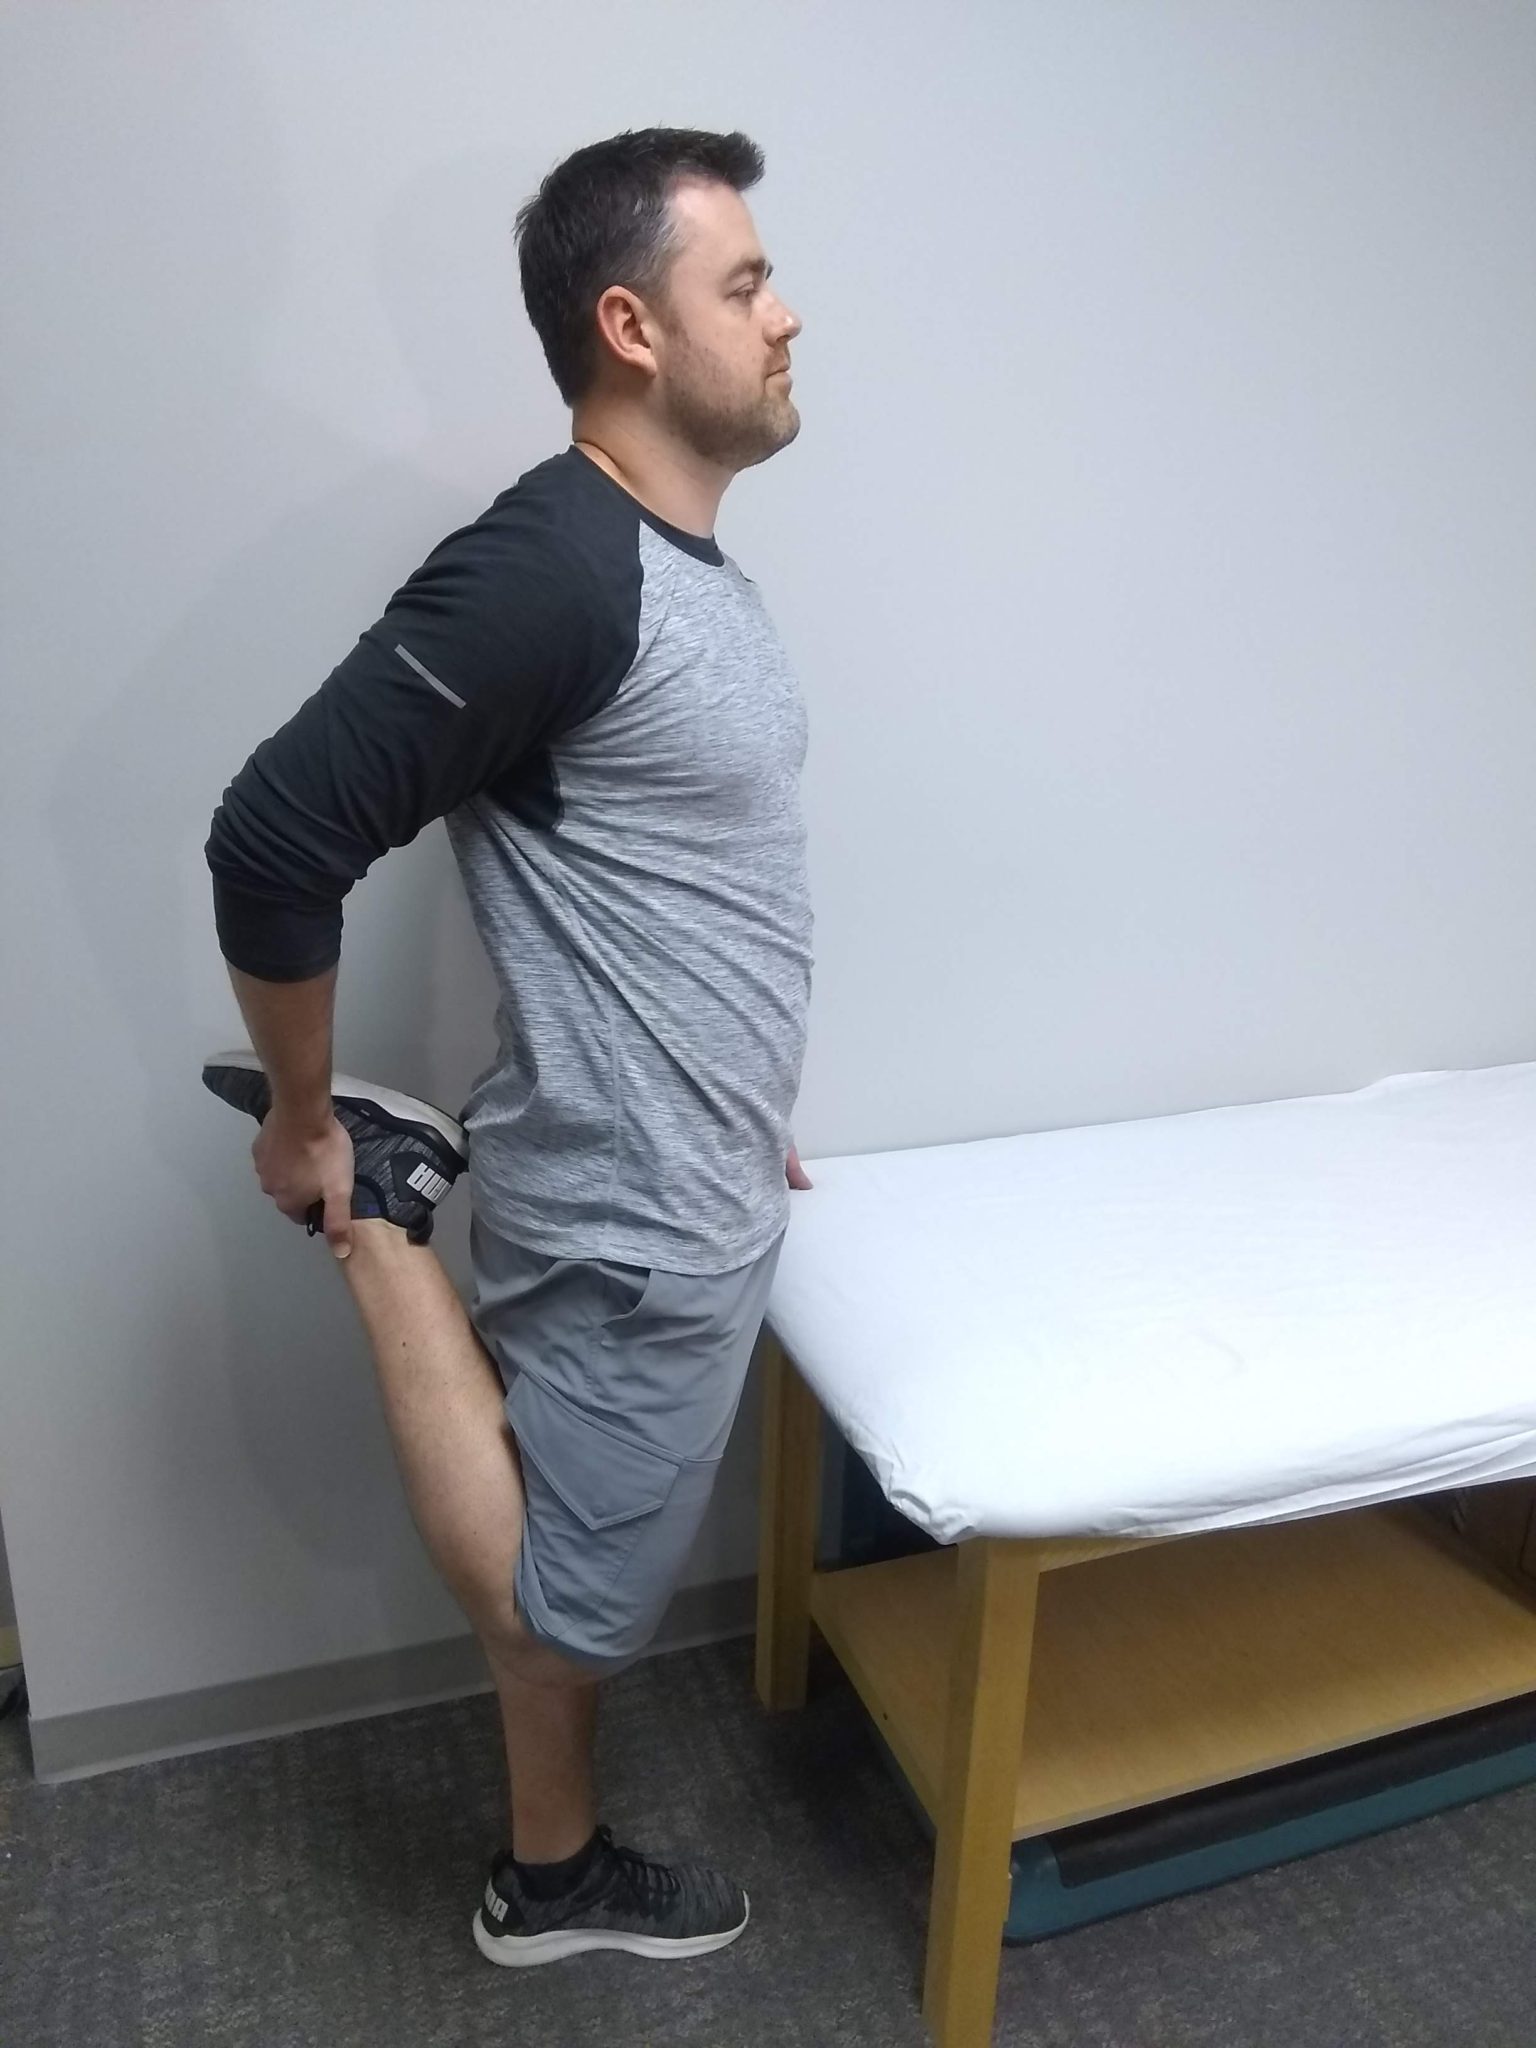 Standing Quad Stretch Ending Position